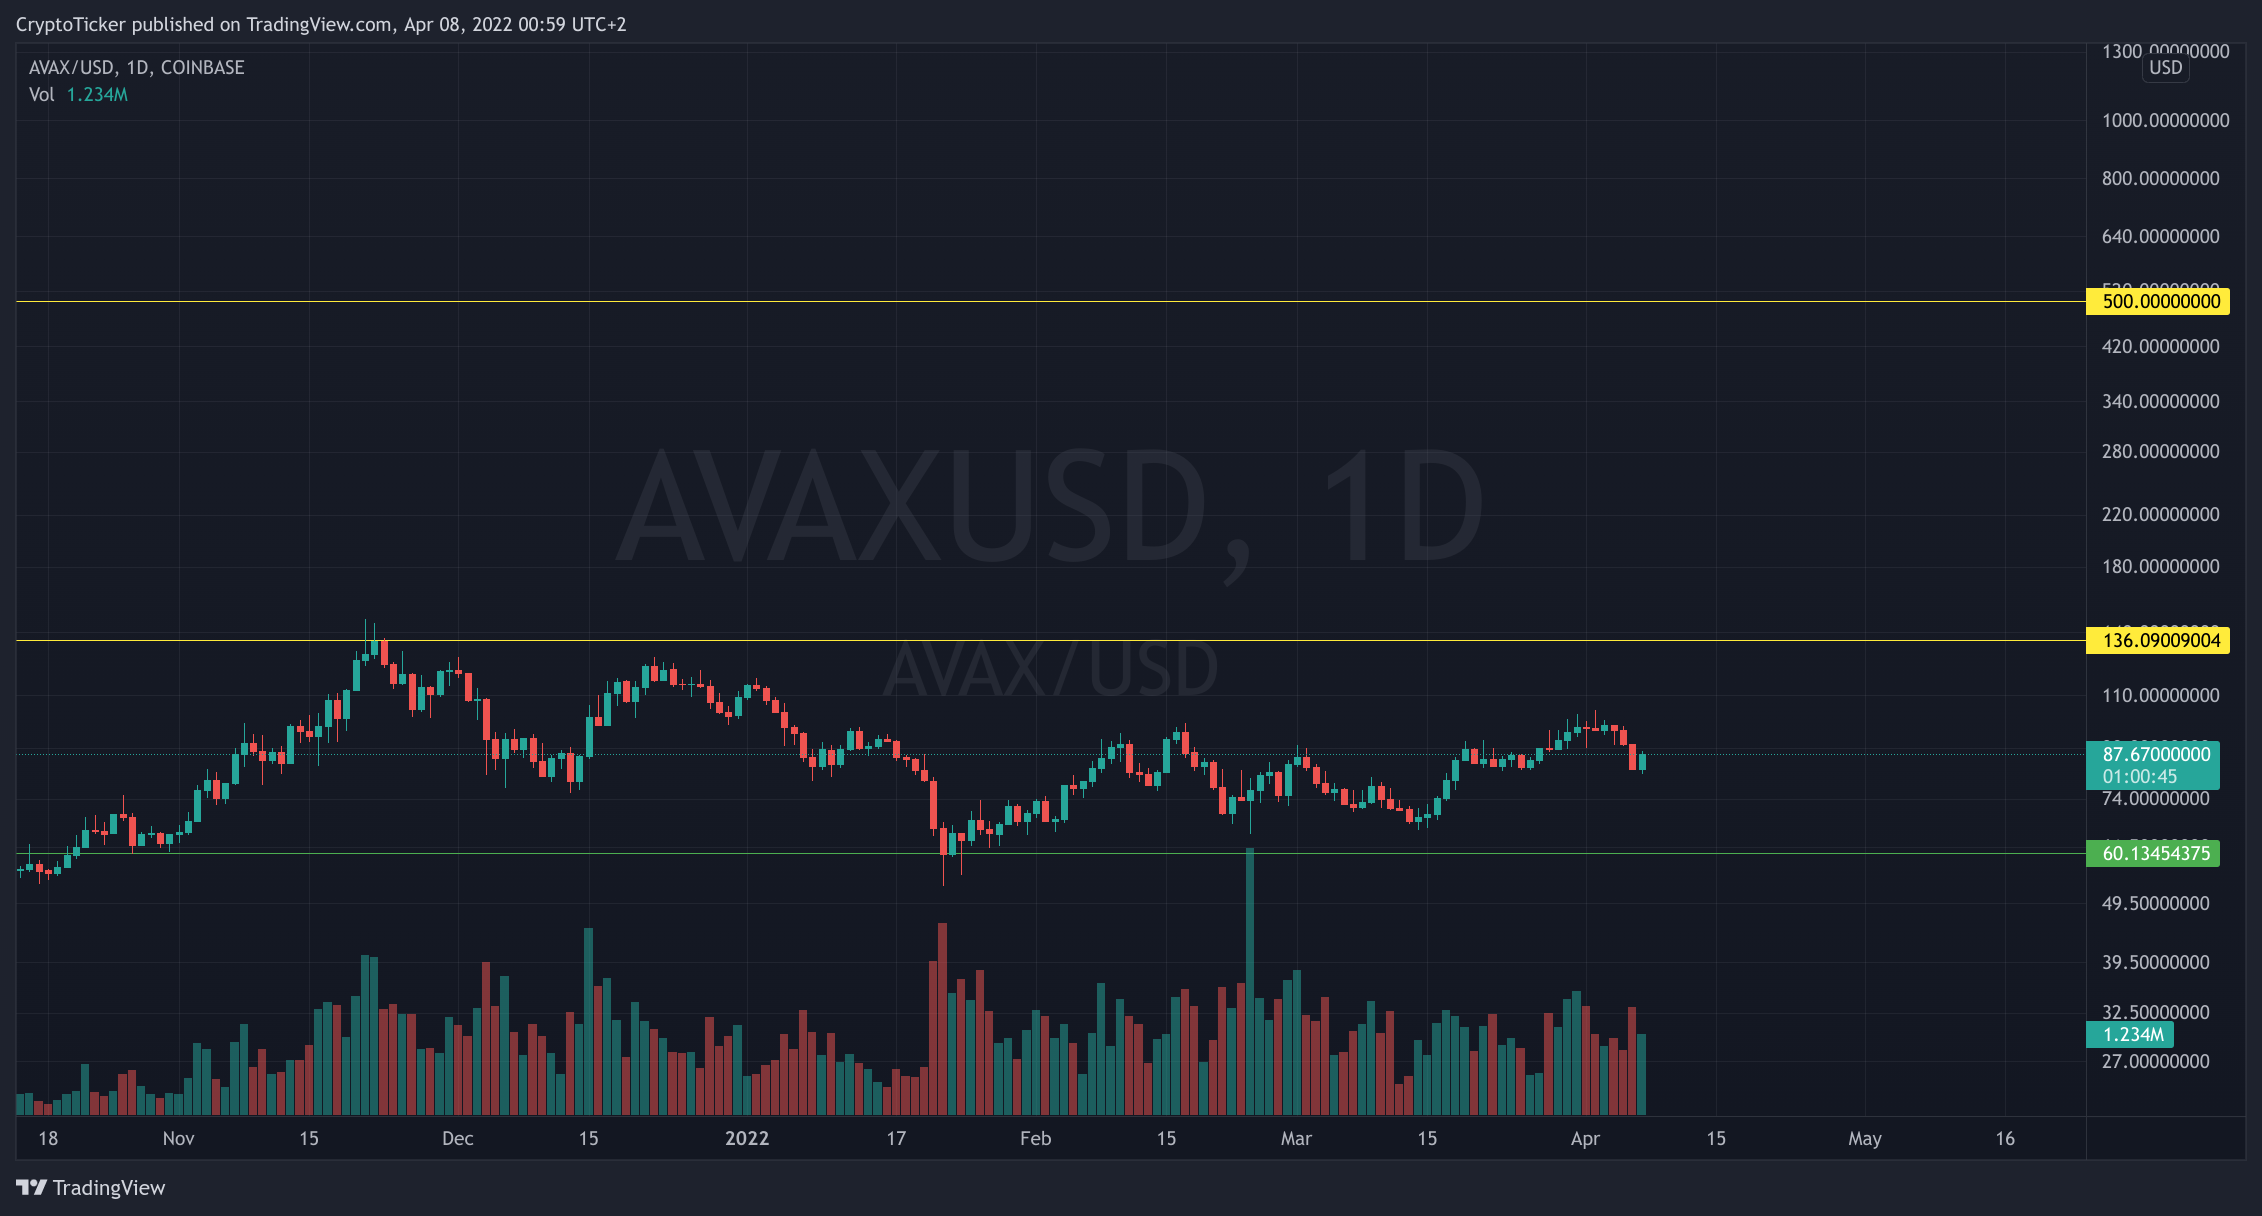 AVAX/USD 1-day chart showing the $500 price mark of Avalanche